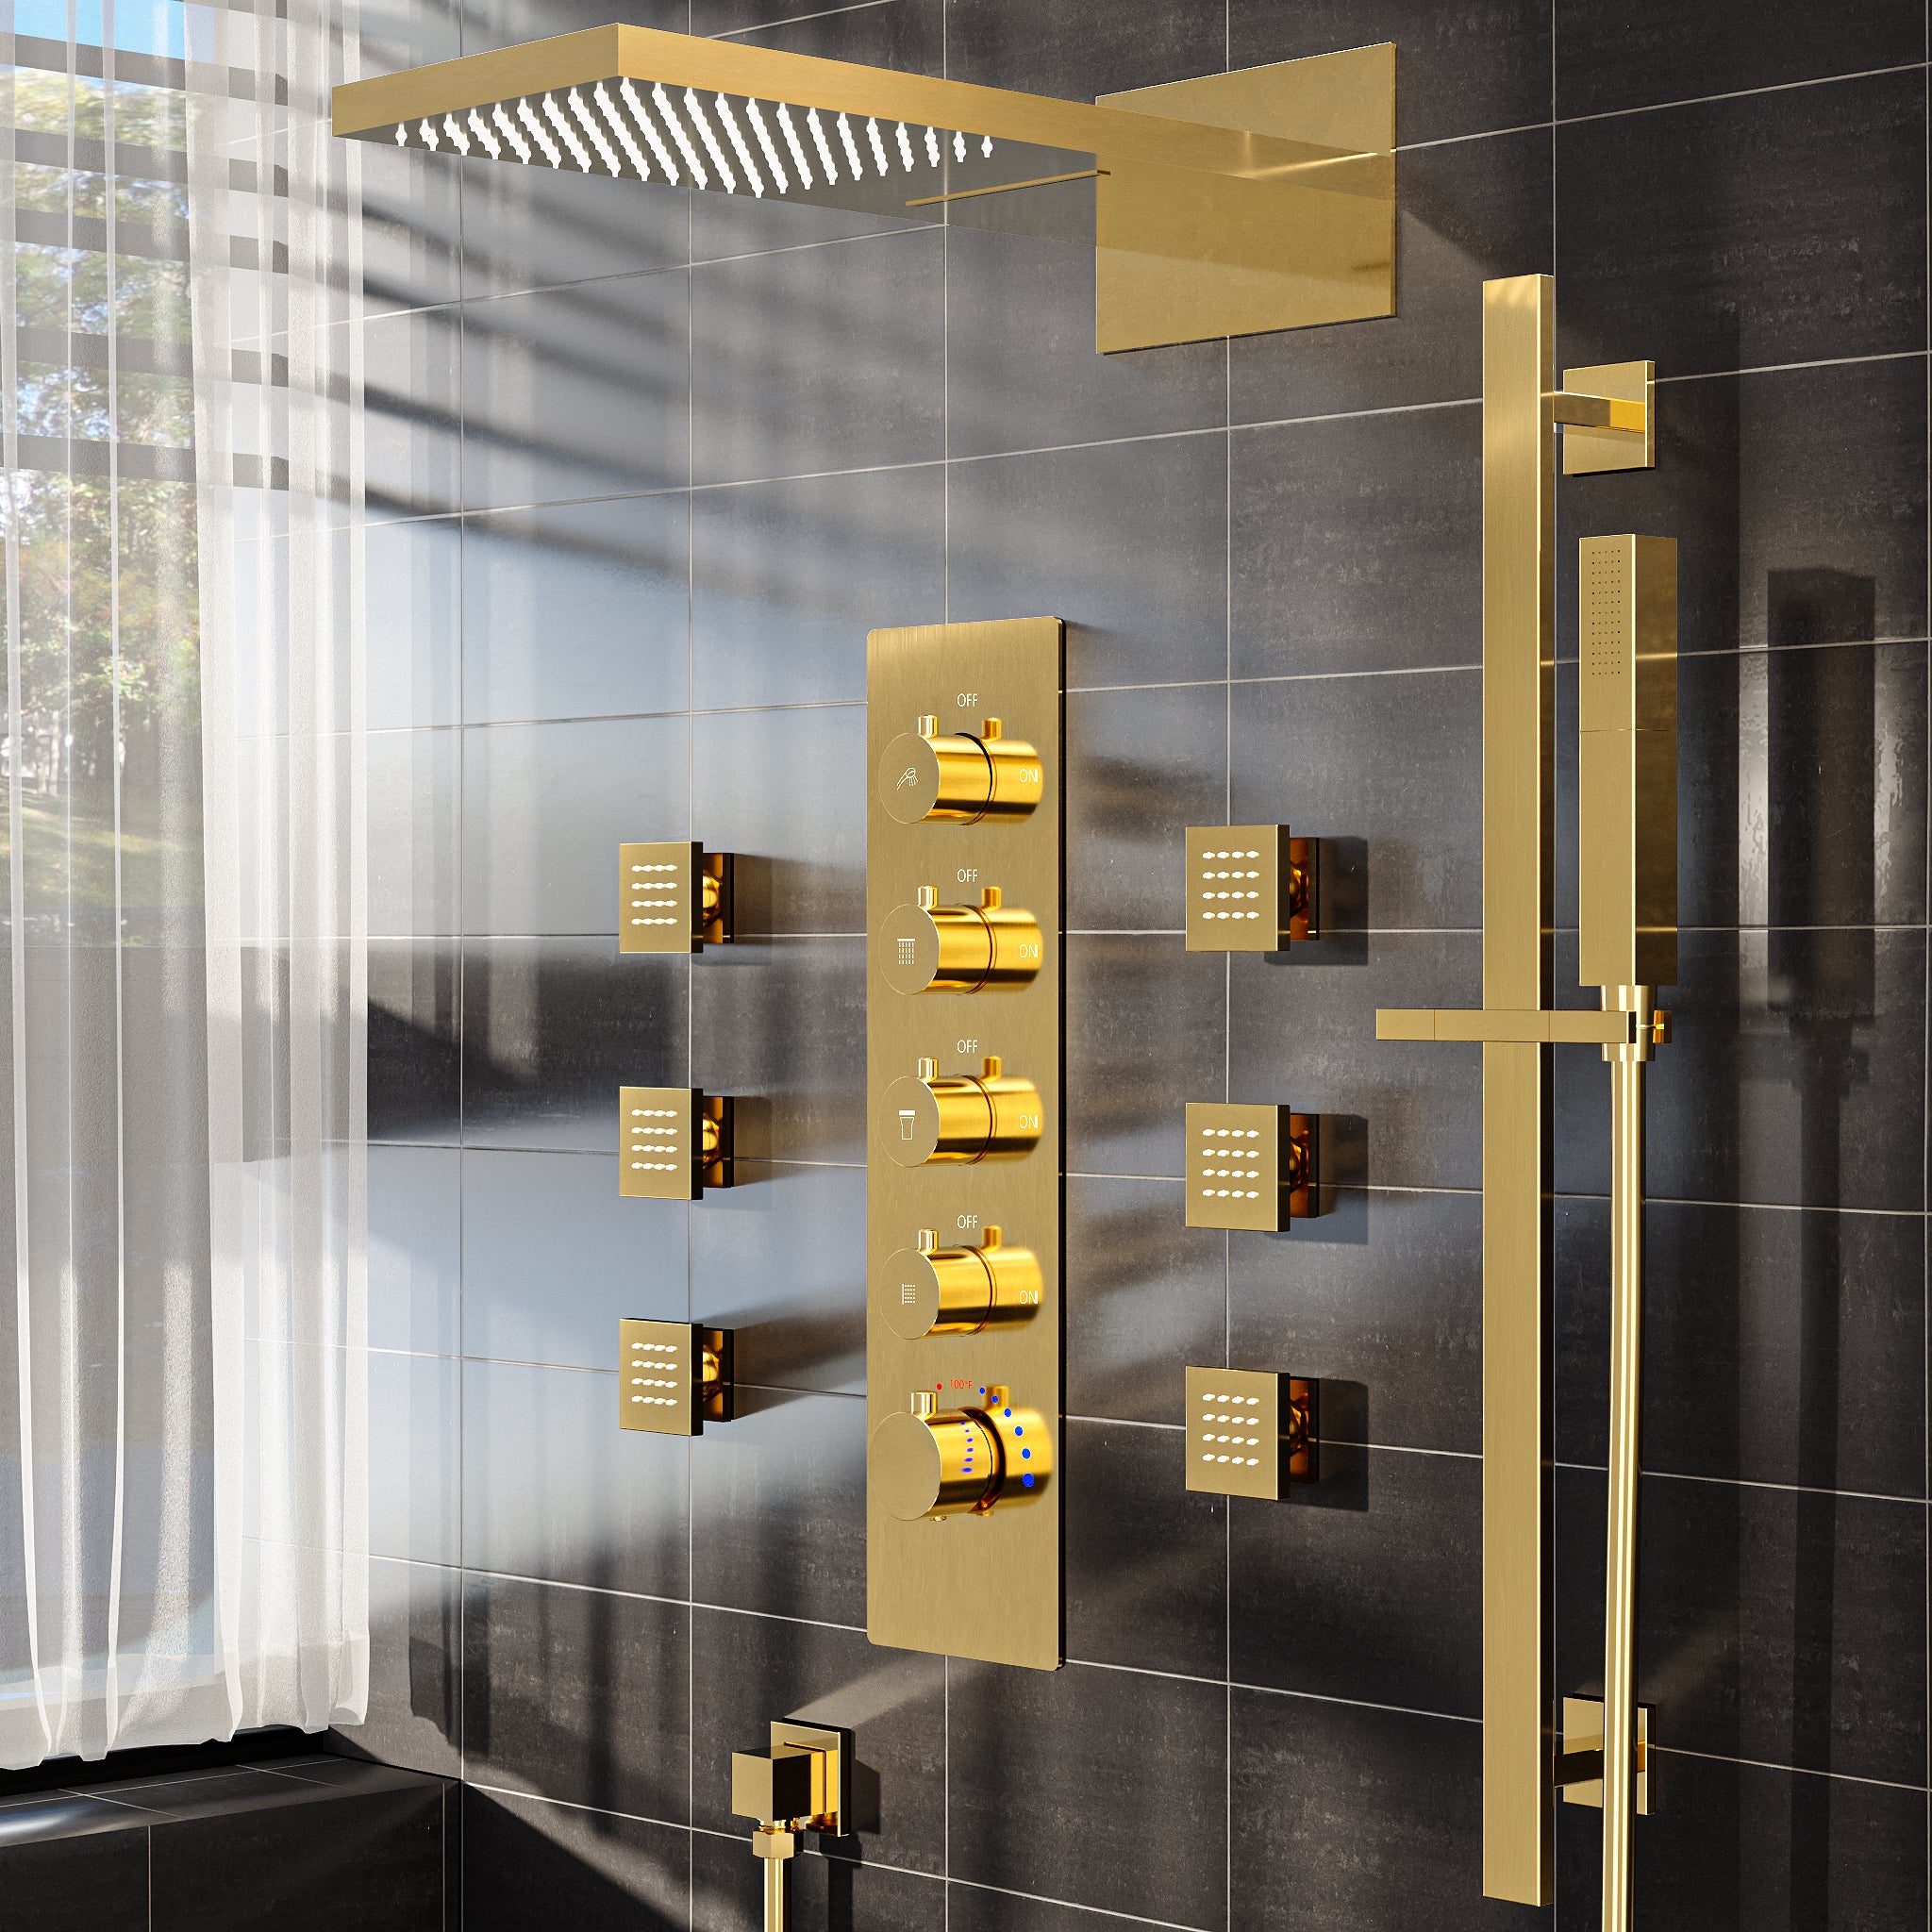 EVERSTEIN Luxury 22" High-Pressure Rainfall & Waterfall Shower Head System with 6 Body Jets and Adjustable Height Handheld Wand - Wall-Mounted, Built-In Valve,  Brushed Gold SFS-1030-GD22